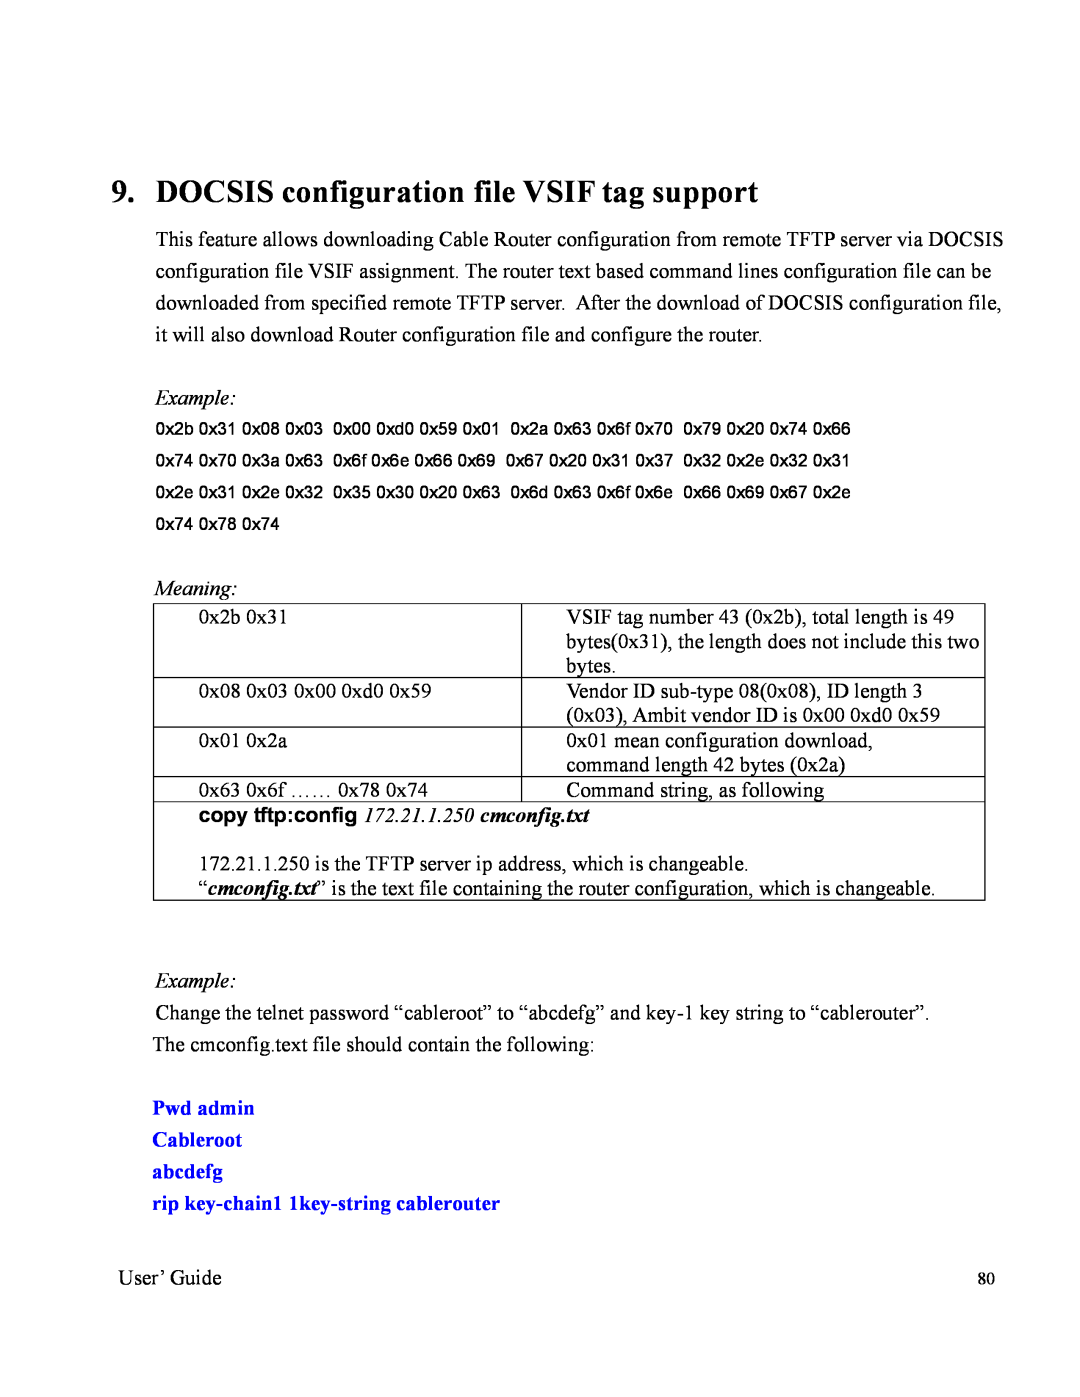 Orion 2000 manual DOCSIS configuration file VSIF tag support, Meaning, Example, copy tftpconfig 172.21.1.250 cmconfig.txt 